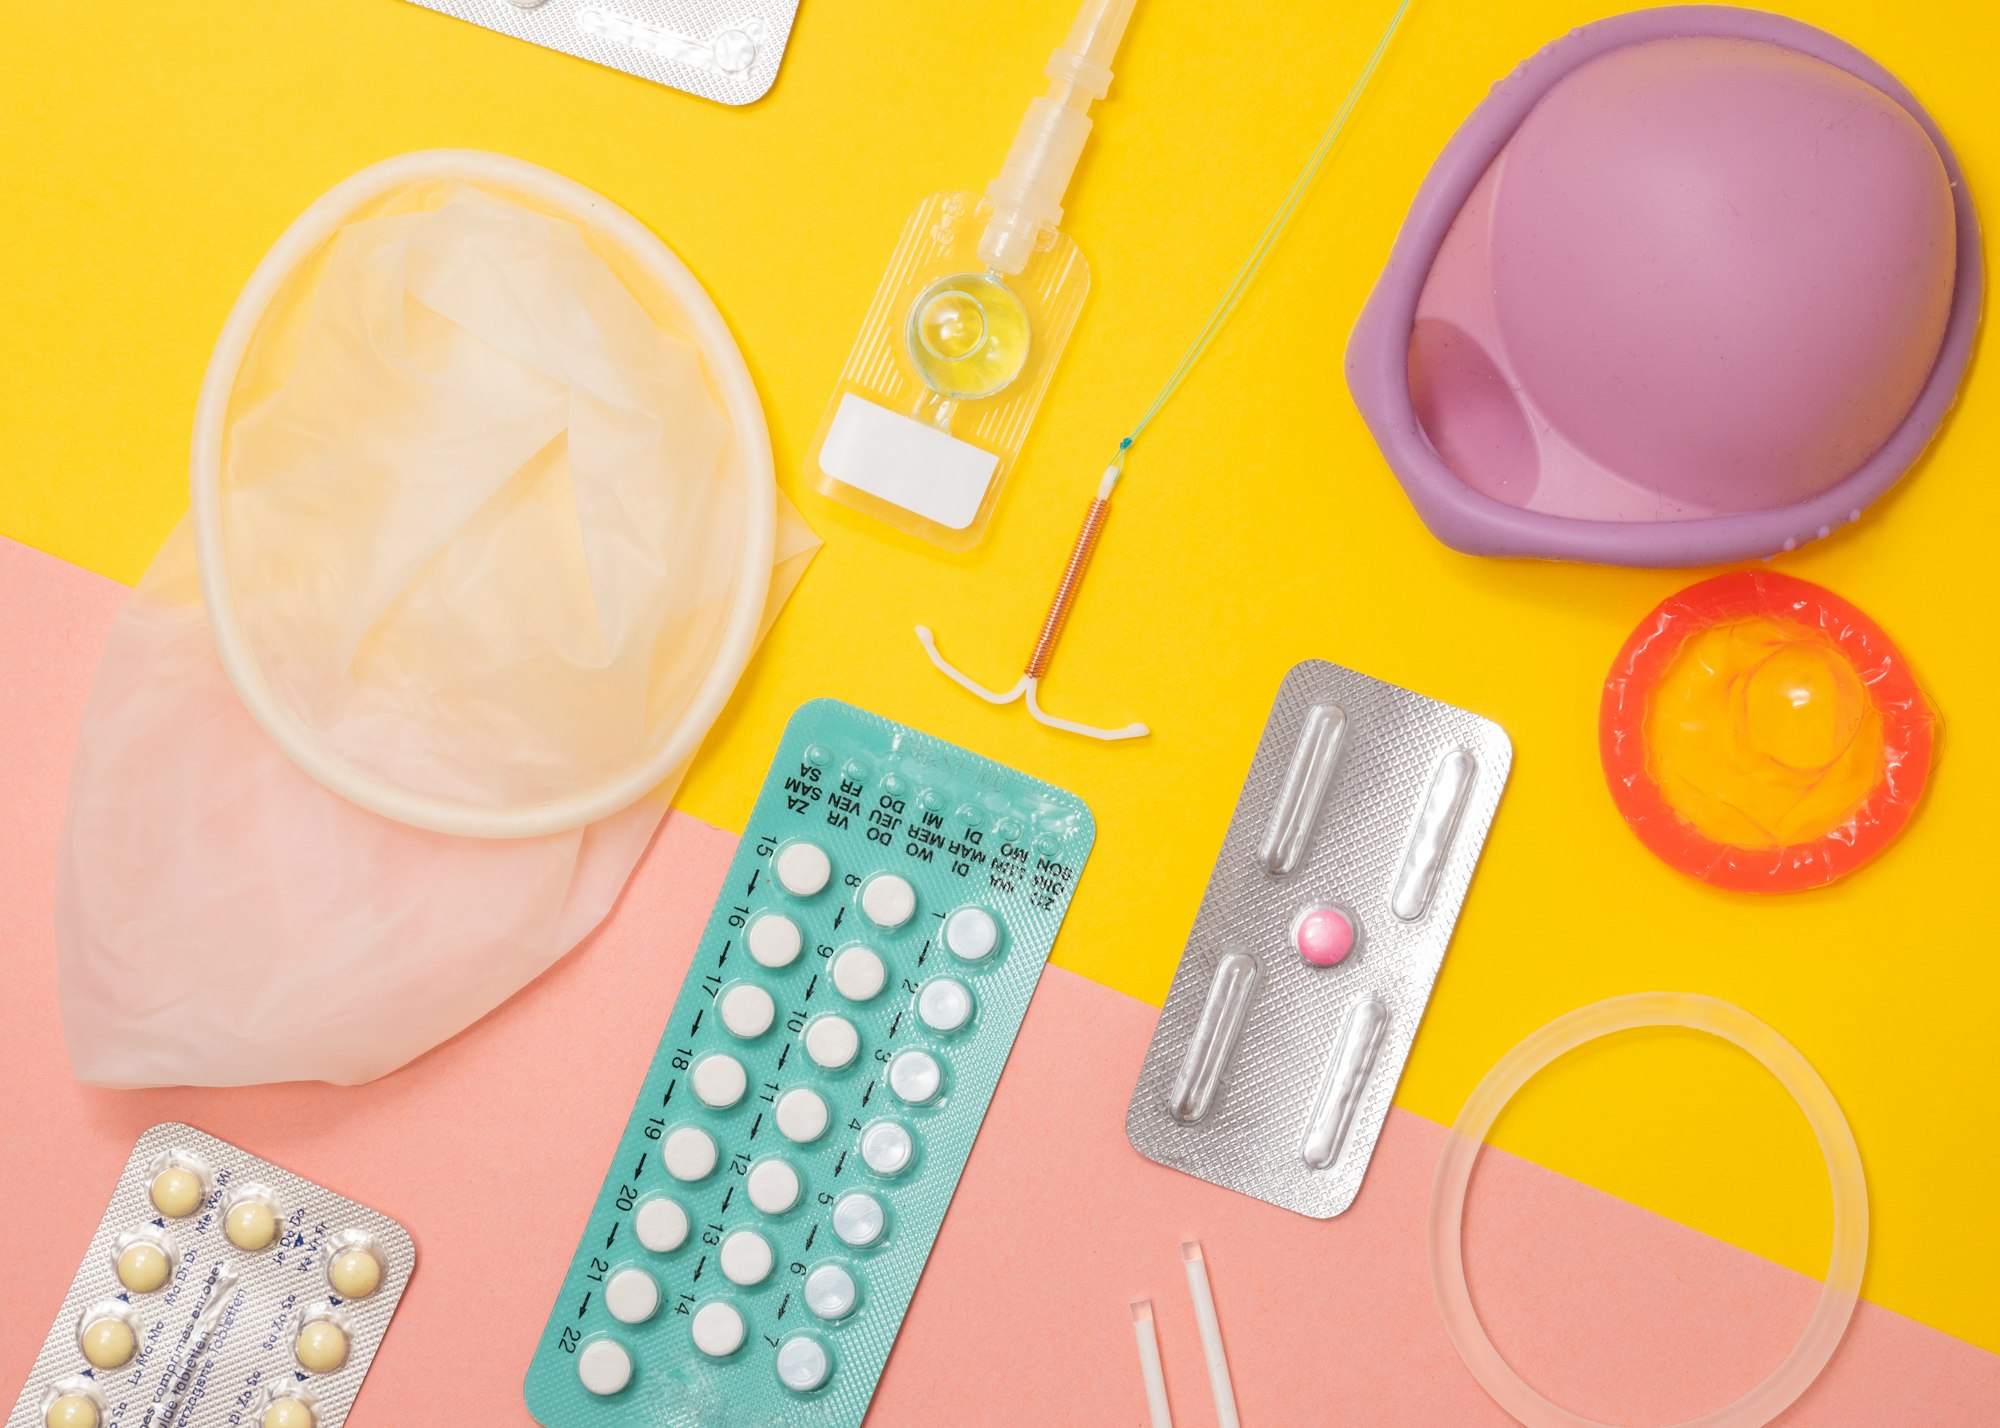 A range of contraceptive methods: contraceptive pills, emergency contraception, condom, IUD, vaginal ring, implant